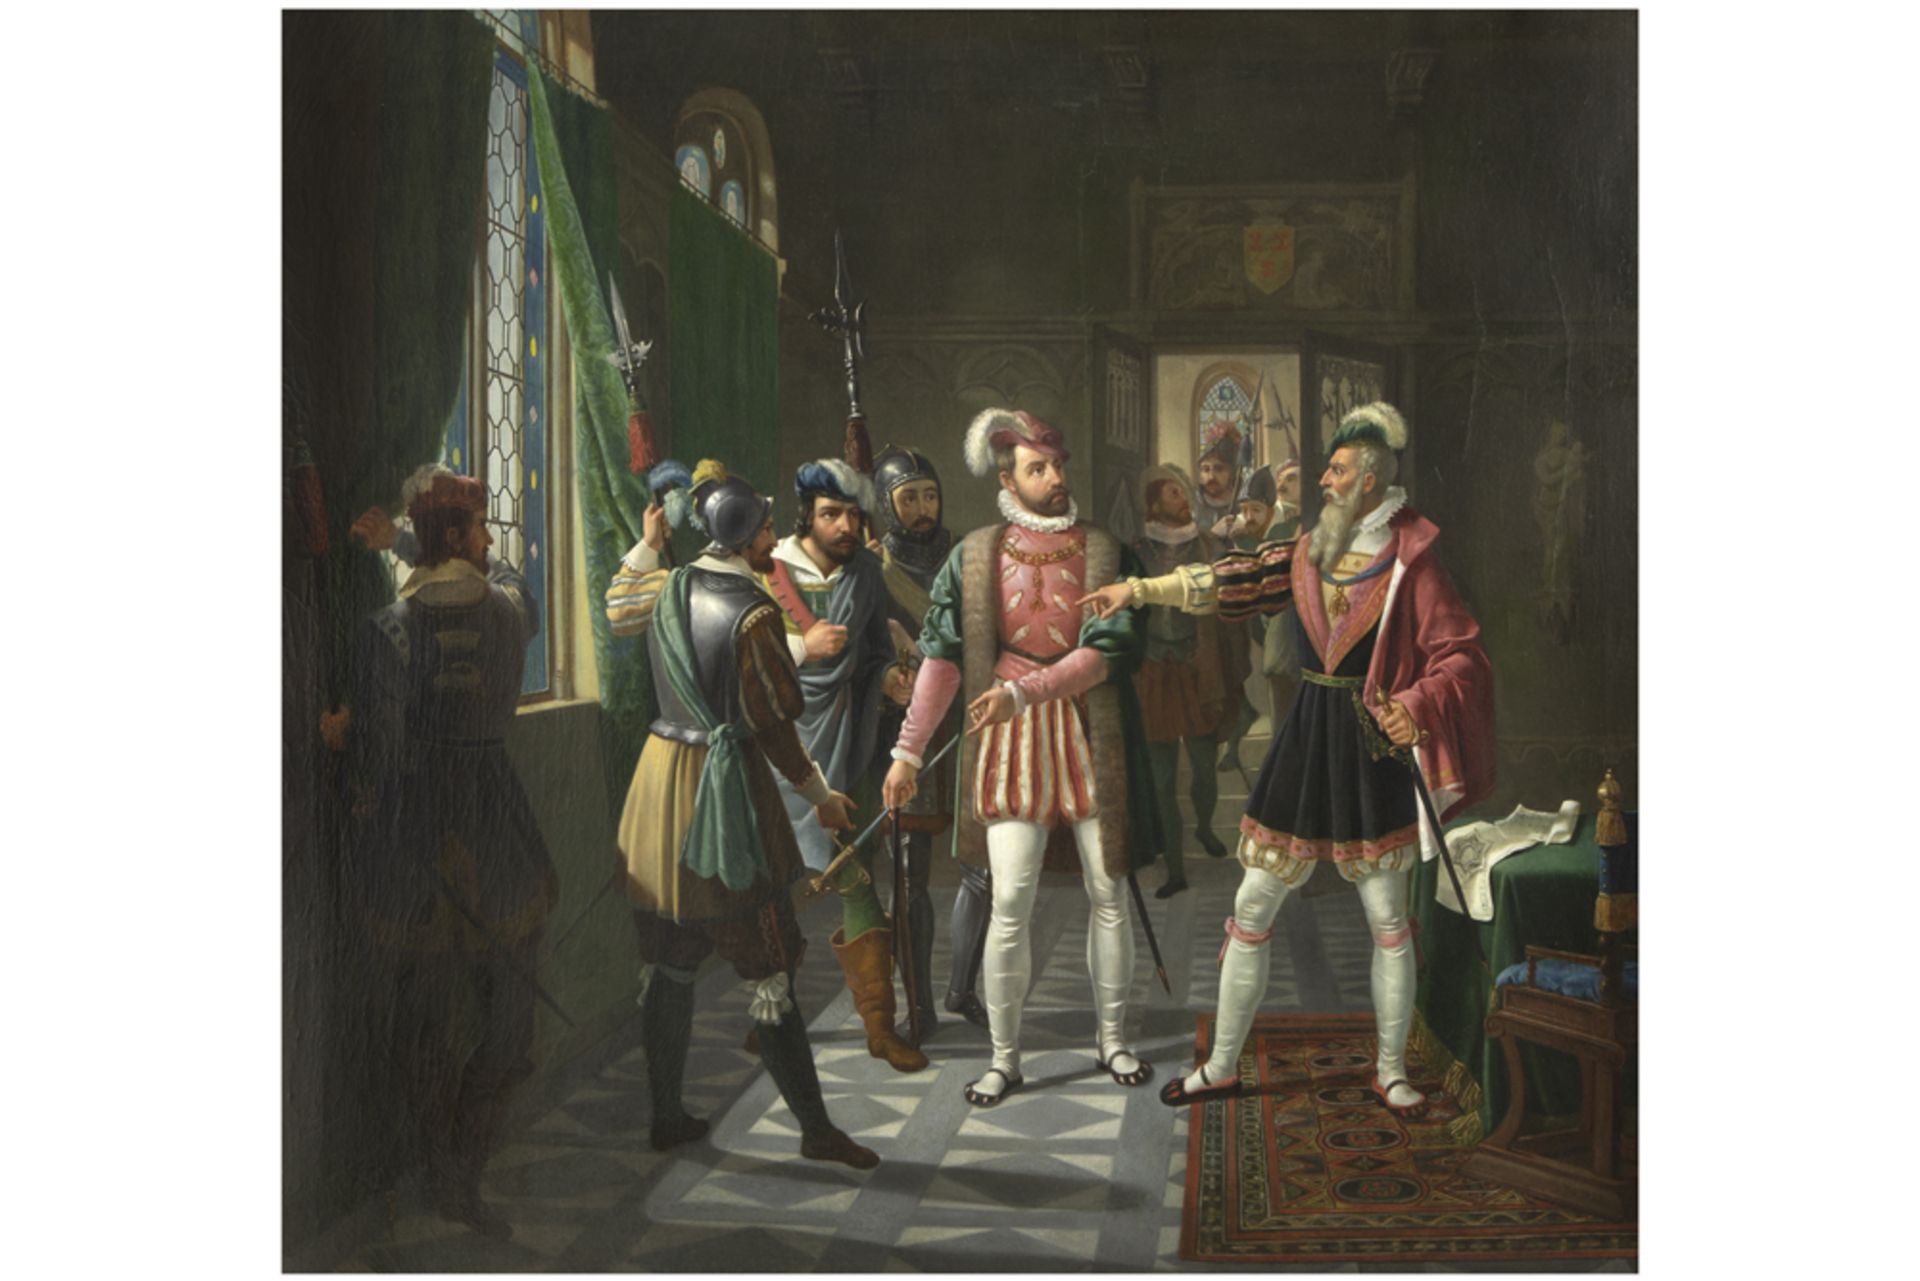 important early 19th Cent. Belgian oil on canvas with a Historismus theme "The Arrest of Count